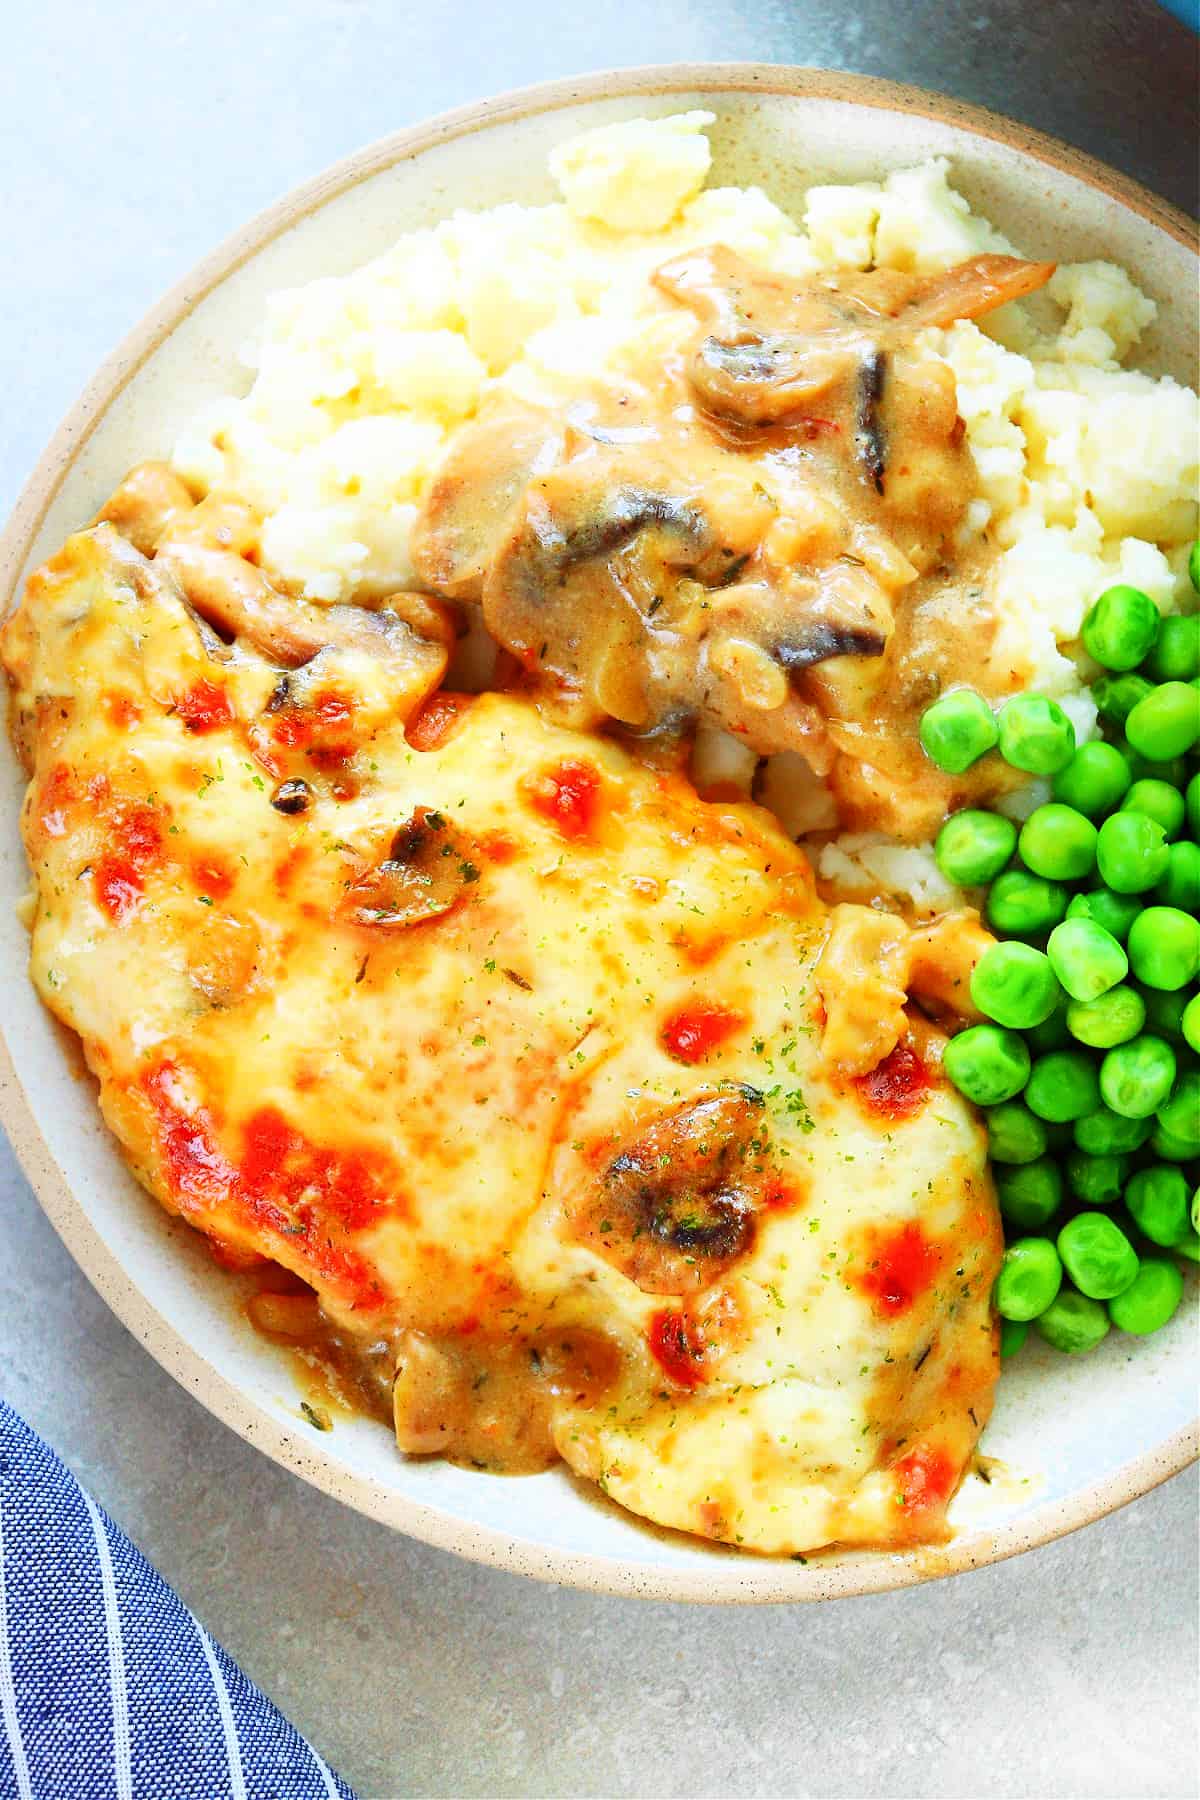 Chicken breast with melted cheese, mashed potatoes with mushroom gravy and steamed green peas on a dinner plate.